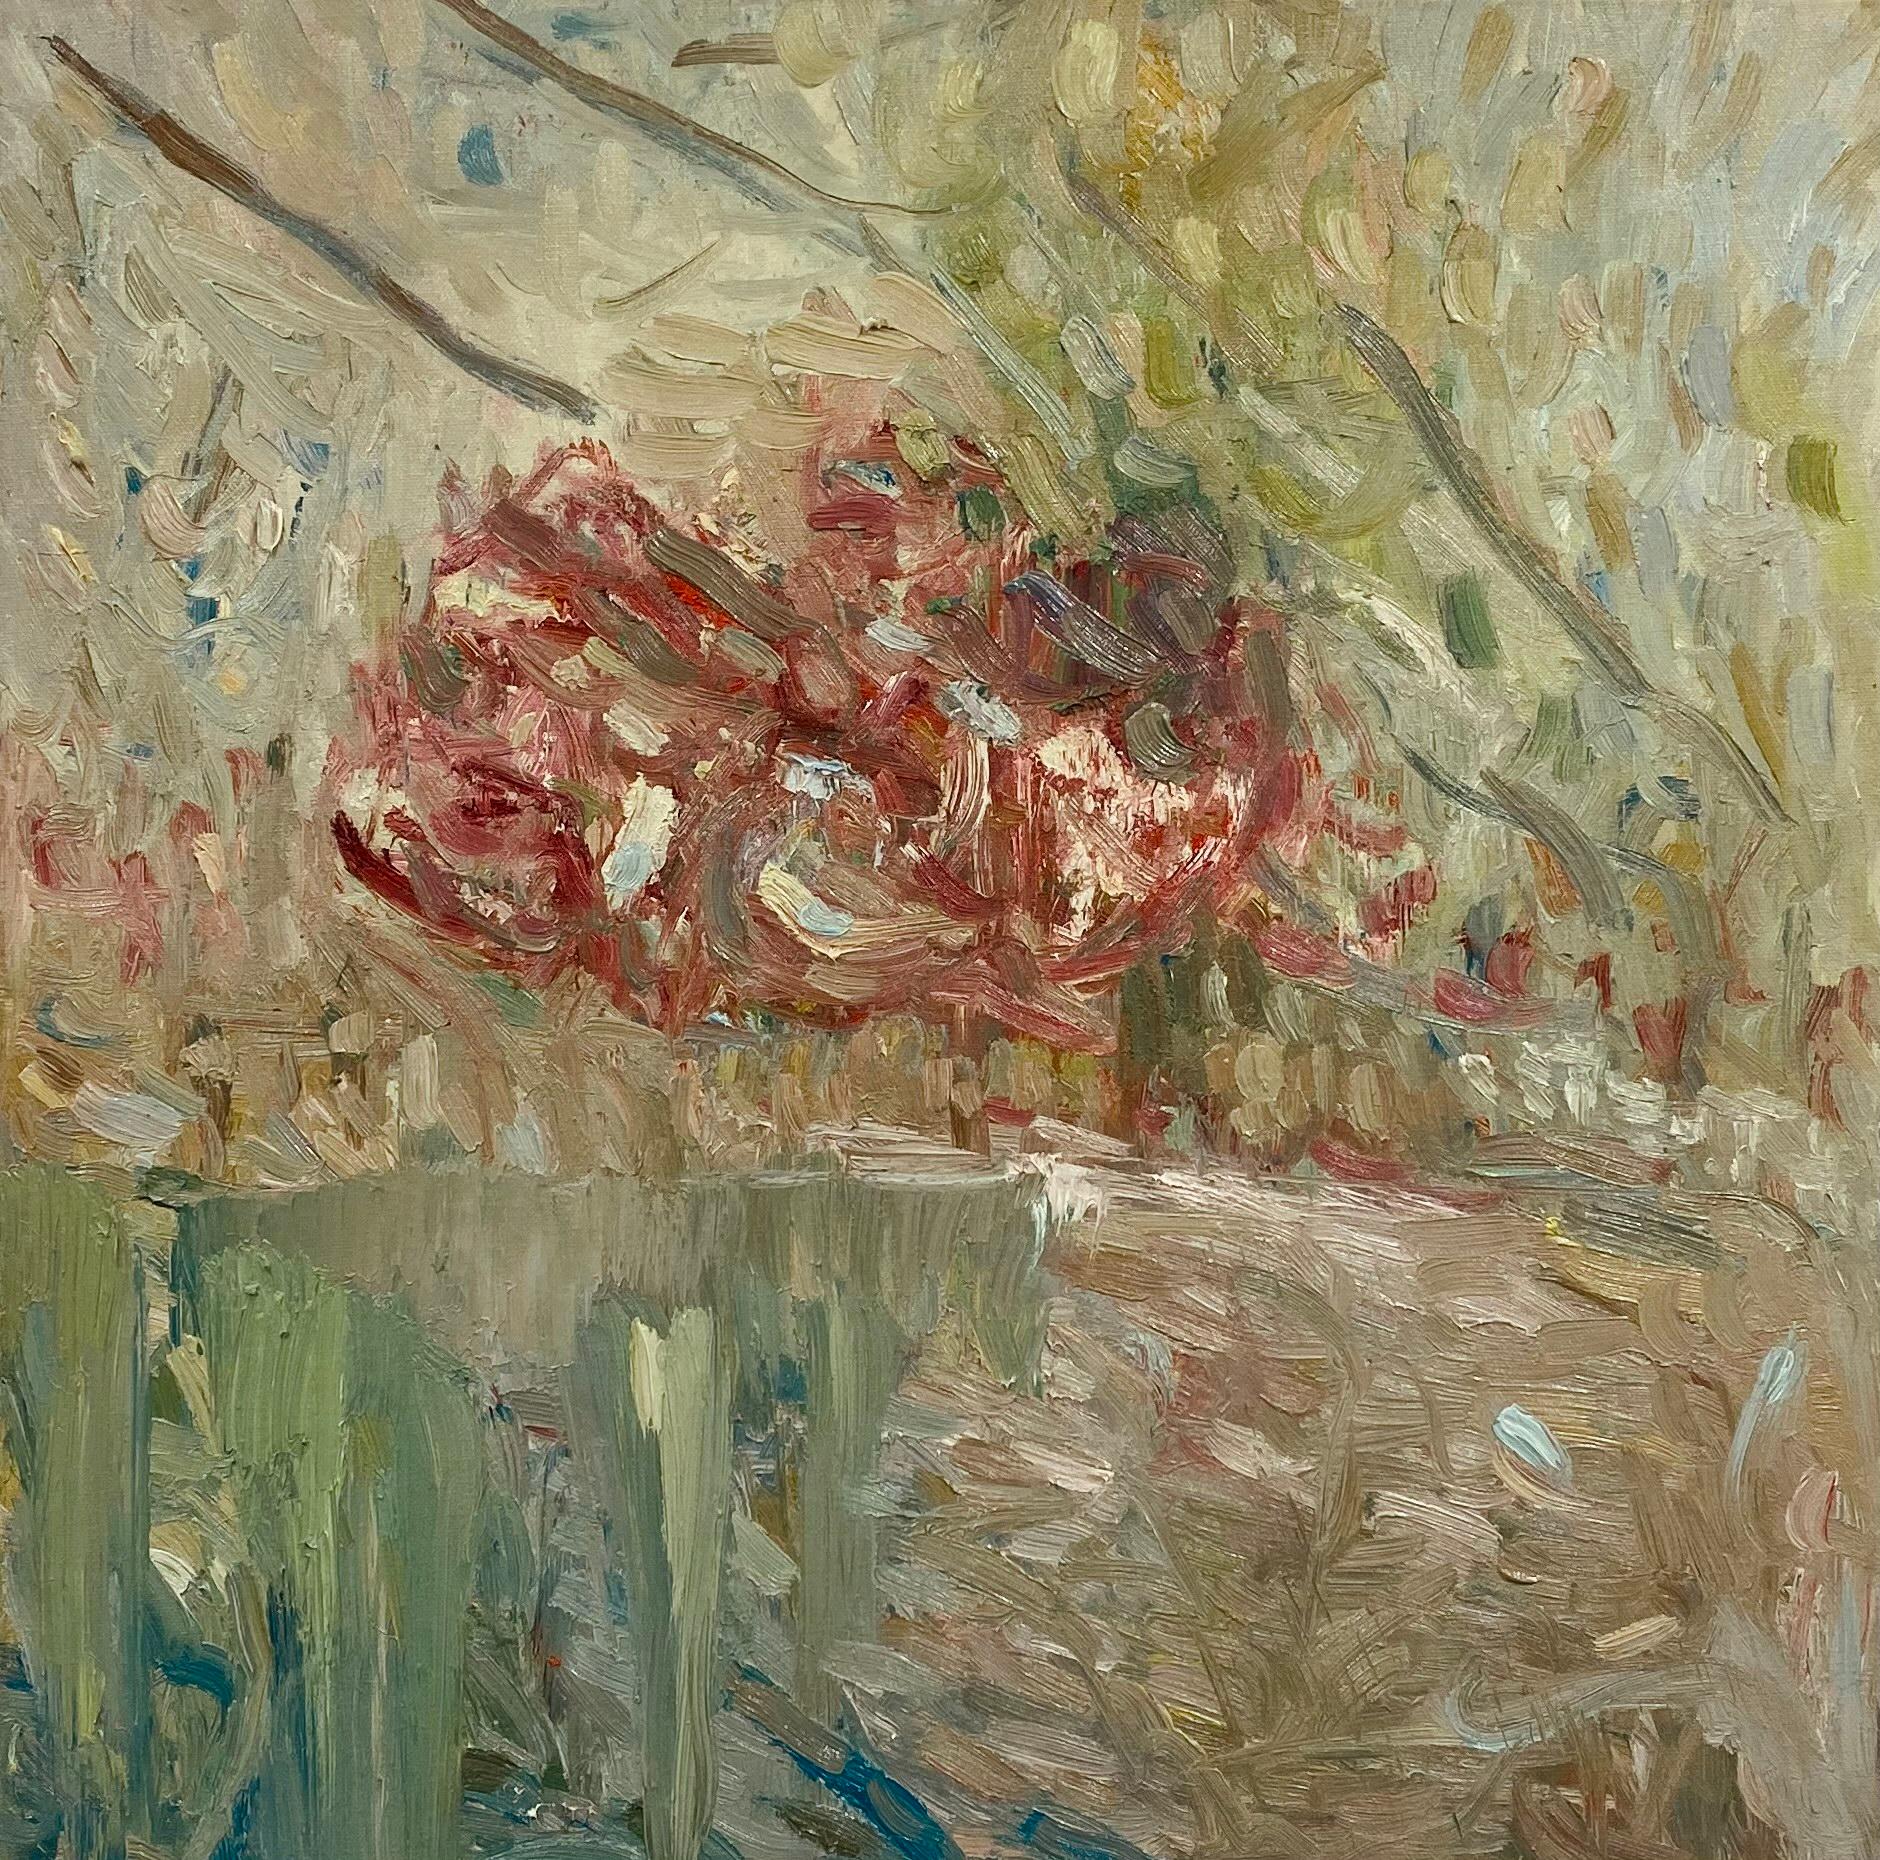 Roses In Bloom By The Lake. Abstrakt-expressionistisches Ölgemälde